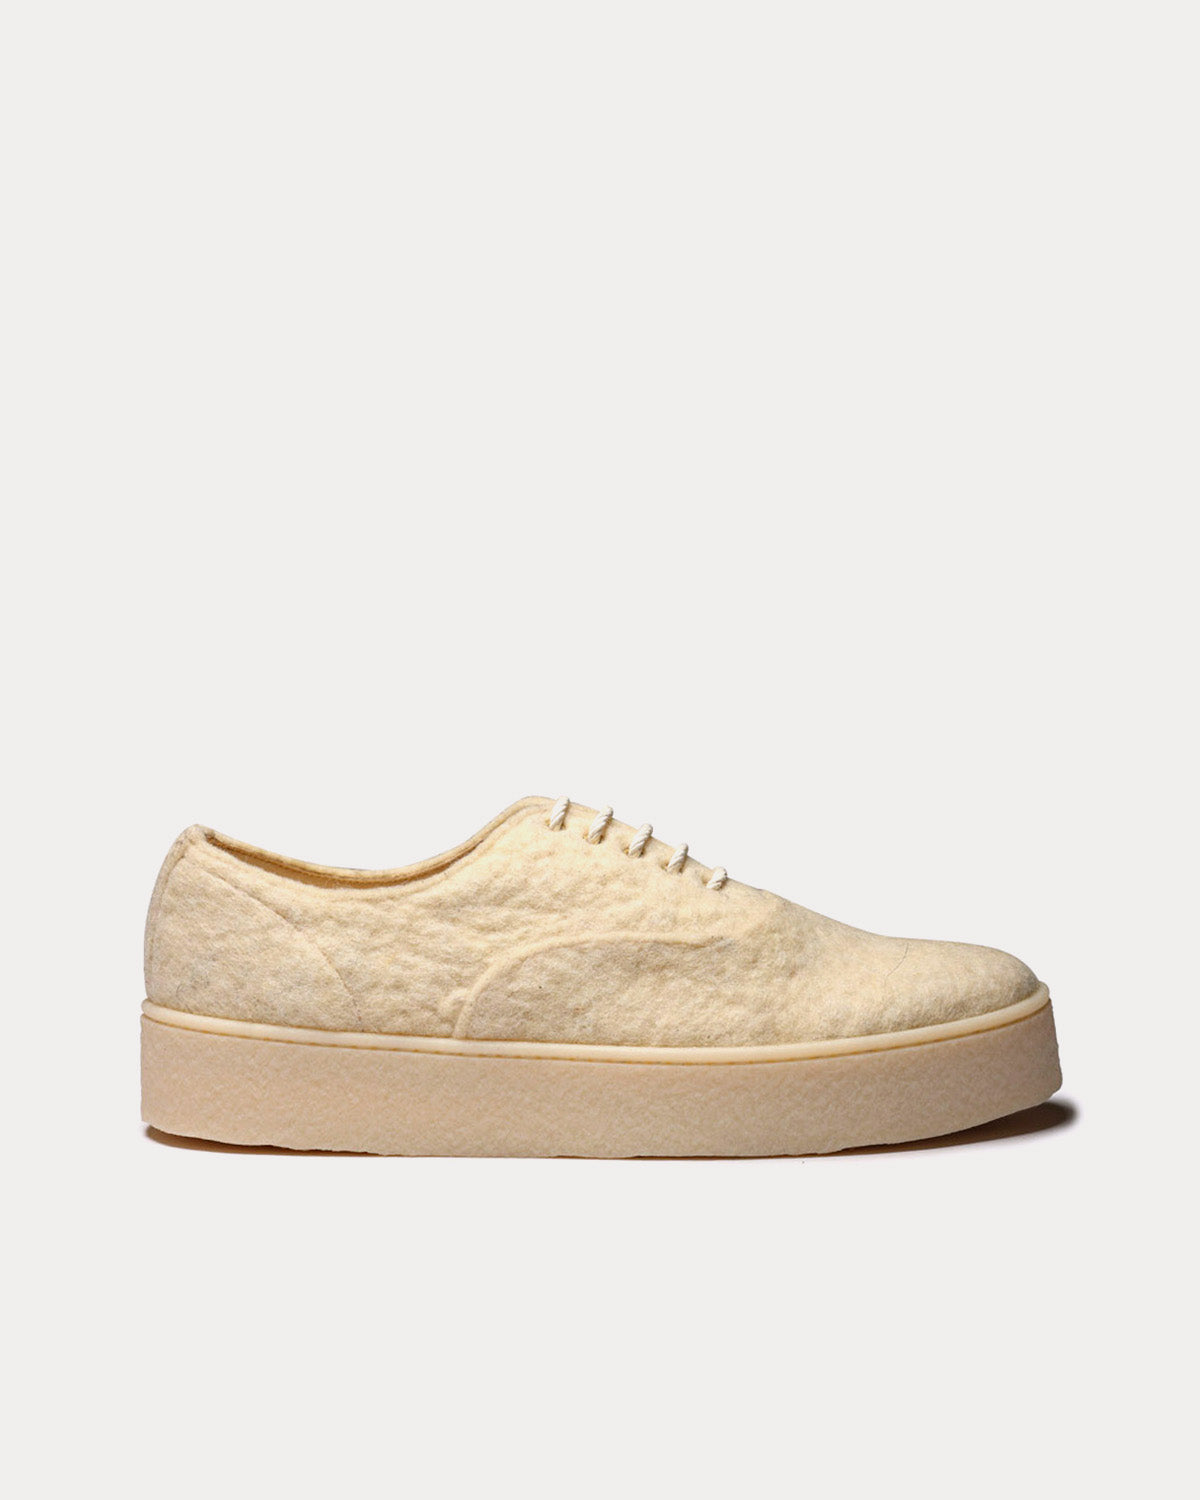 Grenson - M.I.E Cloudwool Natural Low Top Sneakers